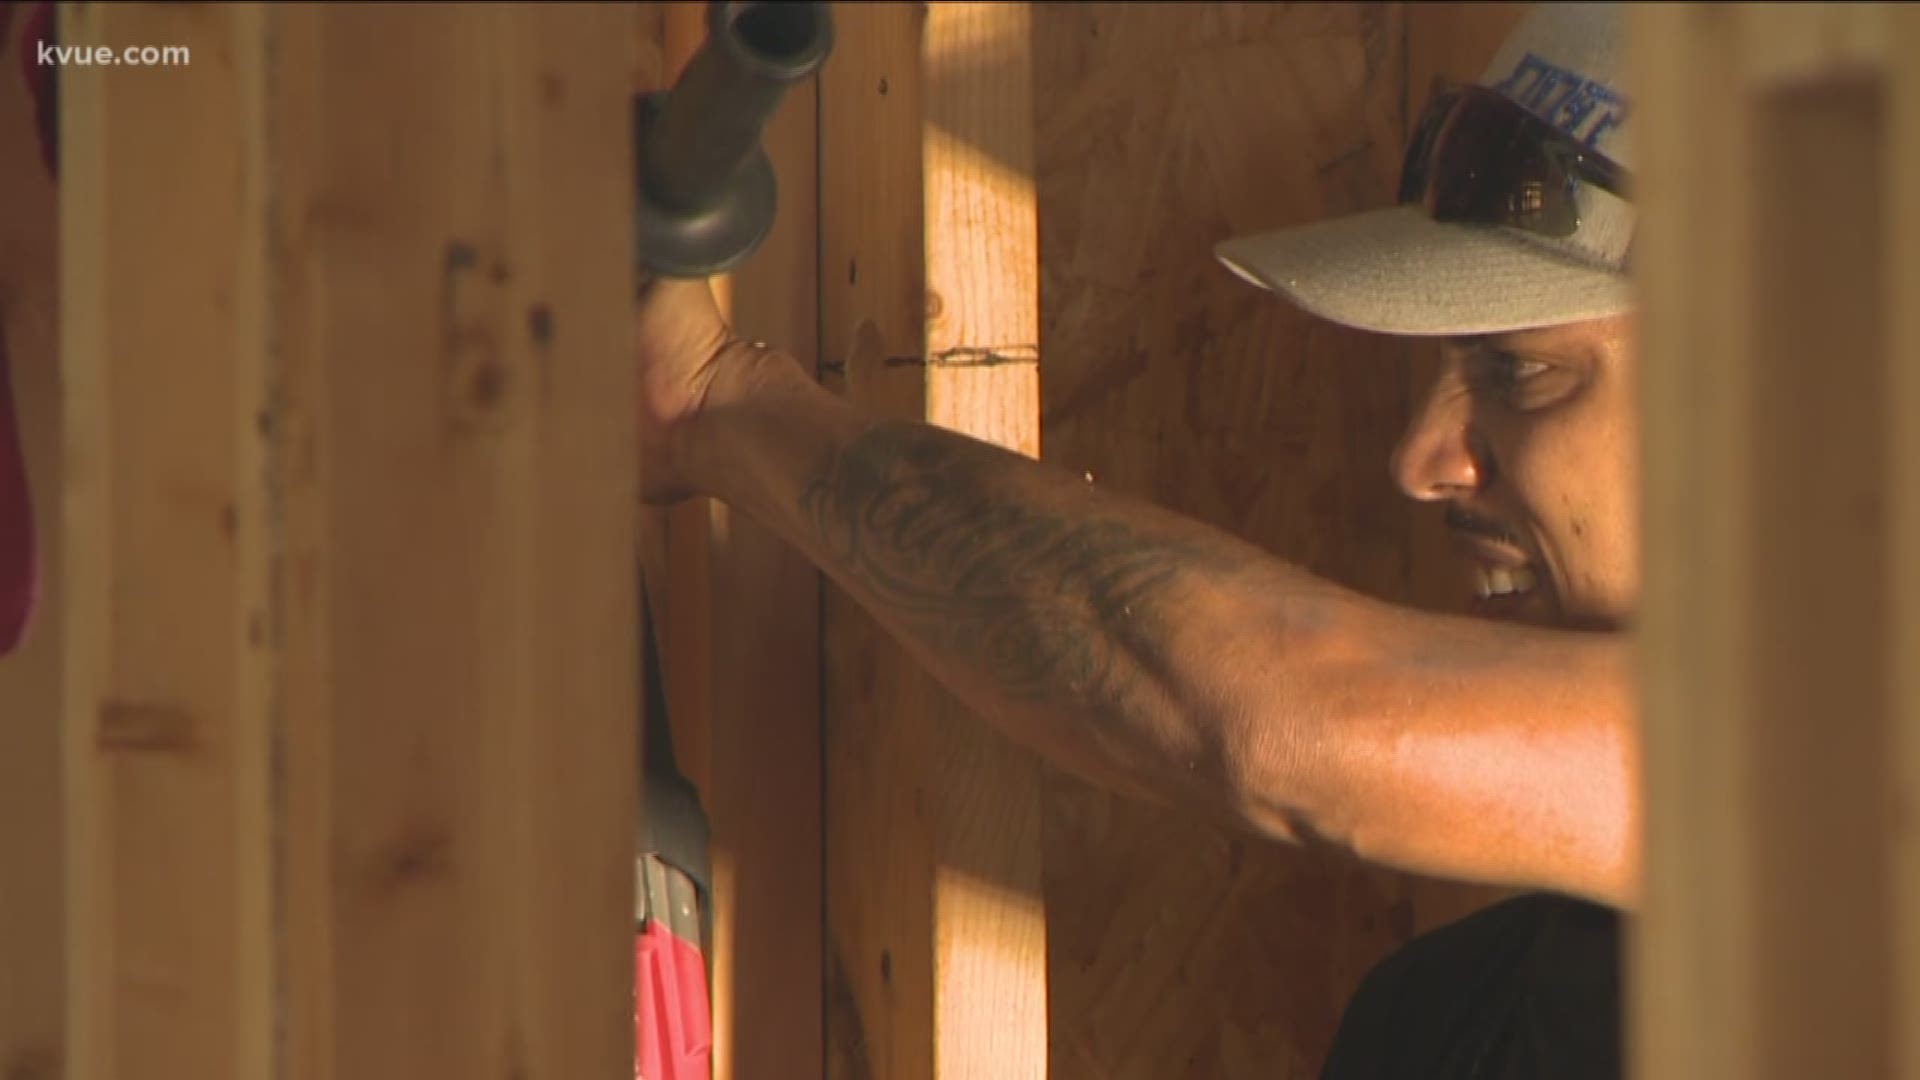 Plumbers are fighting for their livelihoods after Texas lawmakers abolished the agency that regulates and licenses their trade.